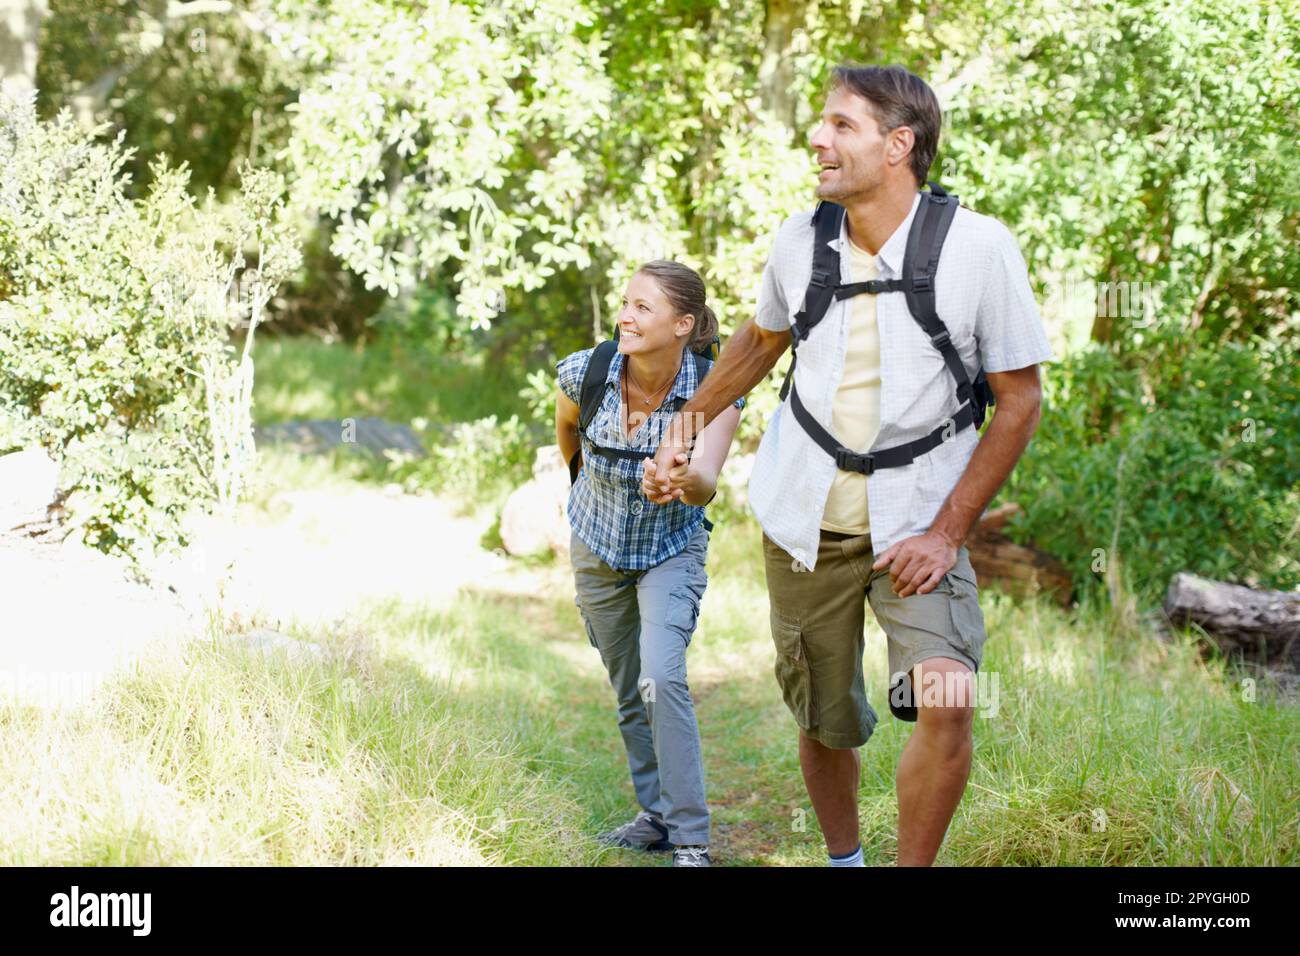 Reliving their first time in the park. A young couple with backpacks walking and holding hands. Stock Photo